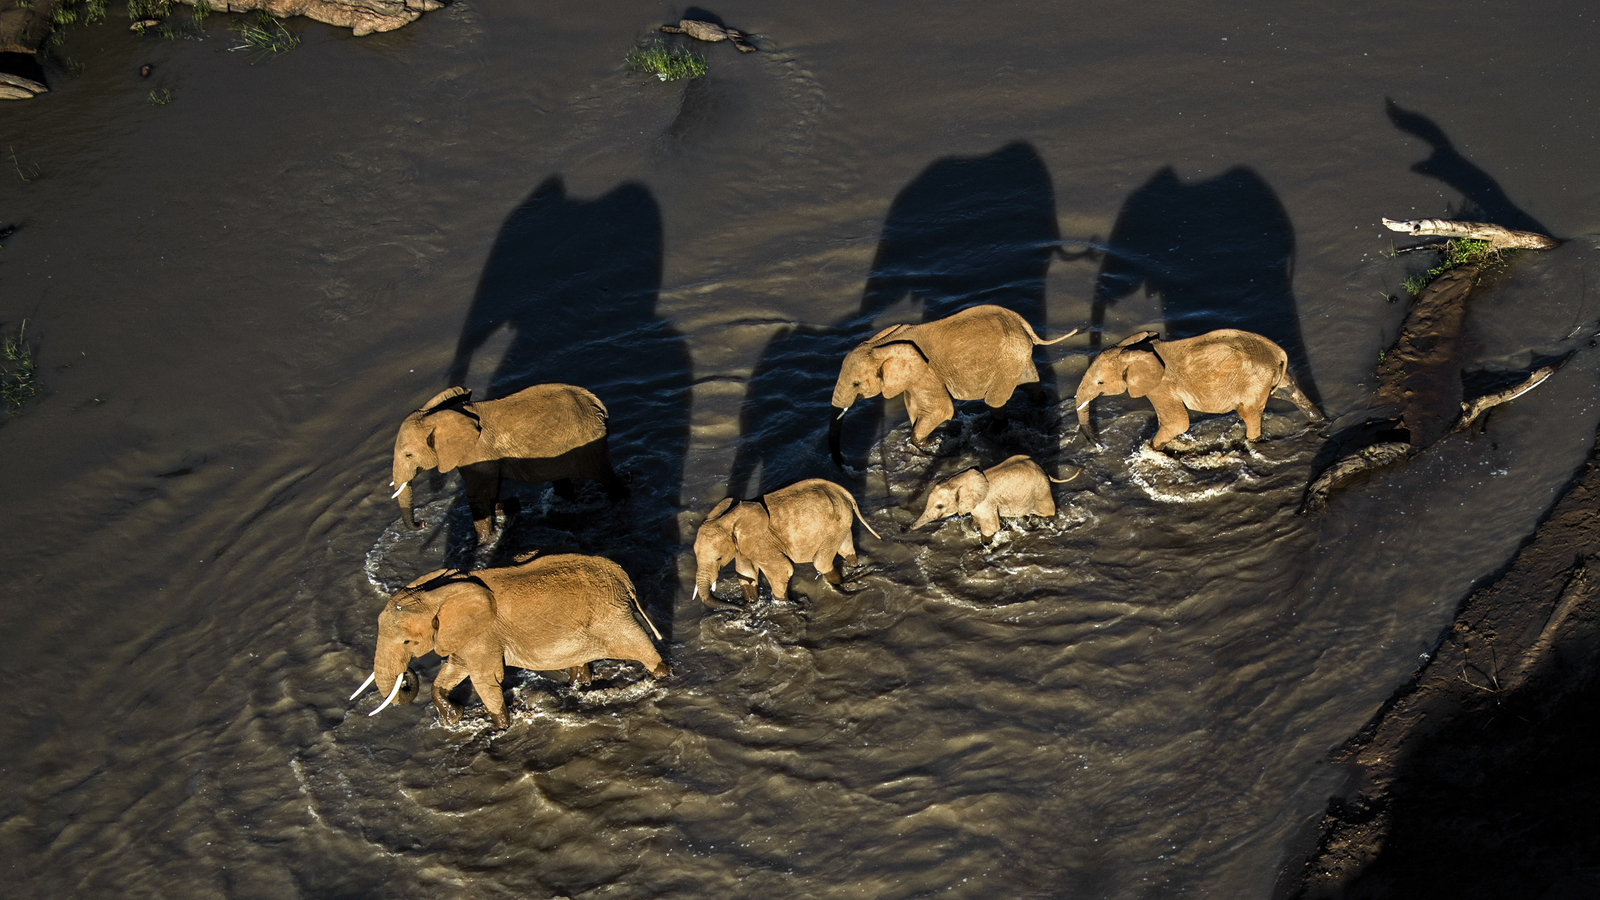 A herd of elephants cross a river at Loisaba Conservancy in Laikipia, northern Kenya. Photo © 2015 Ami Vitale